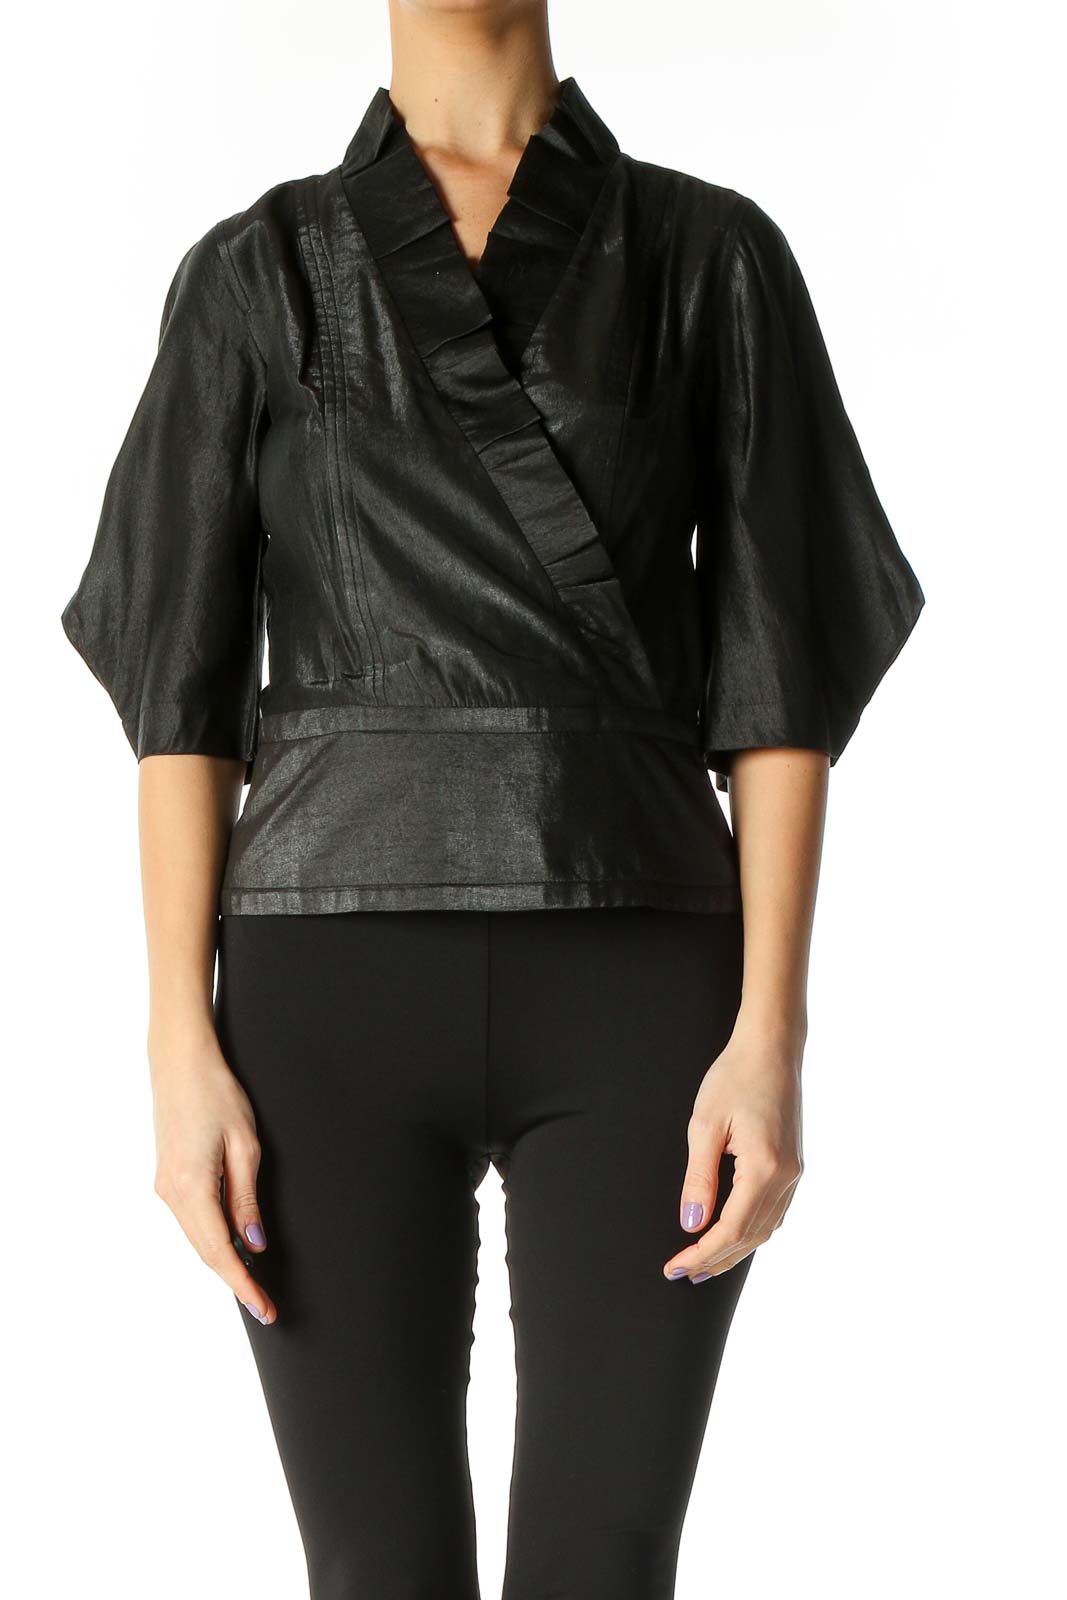 Black Solid Casual Shirt Front